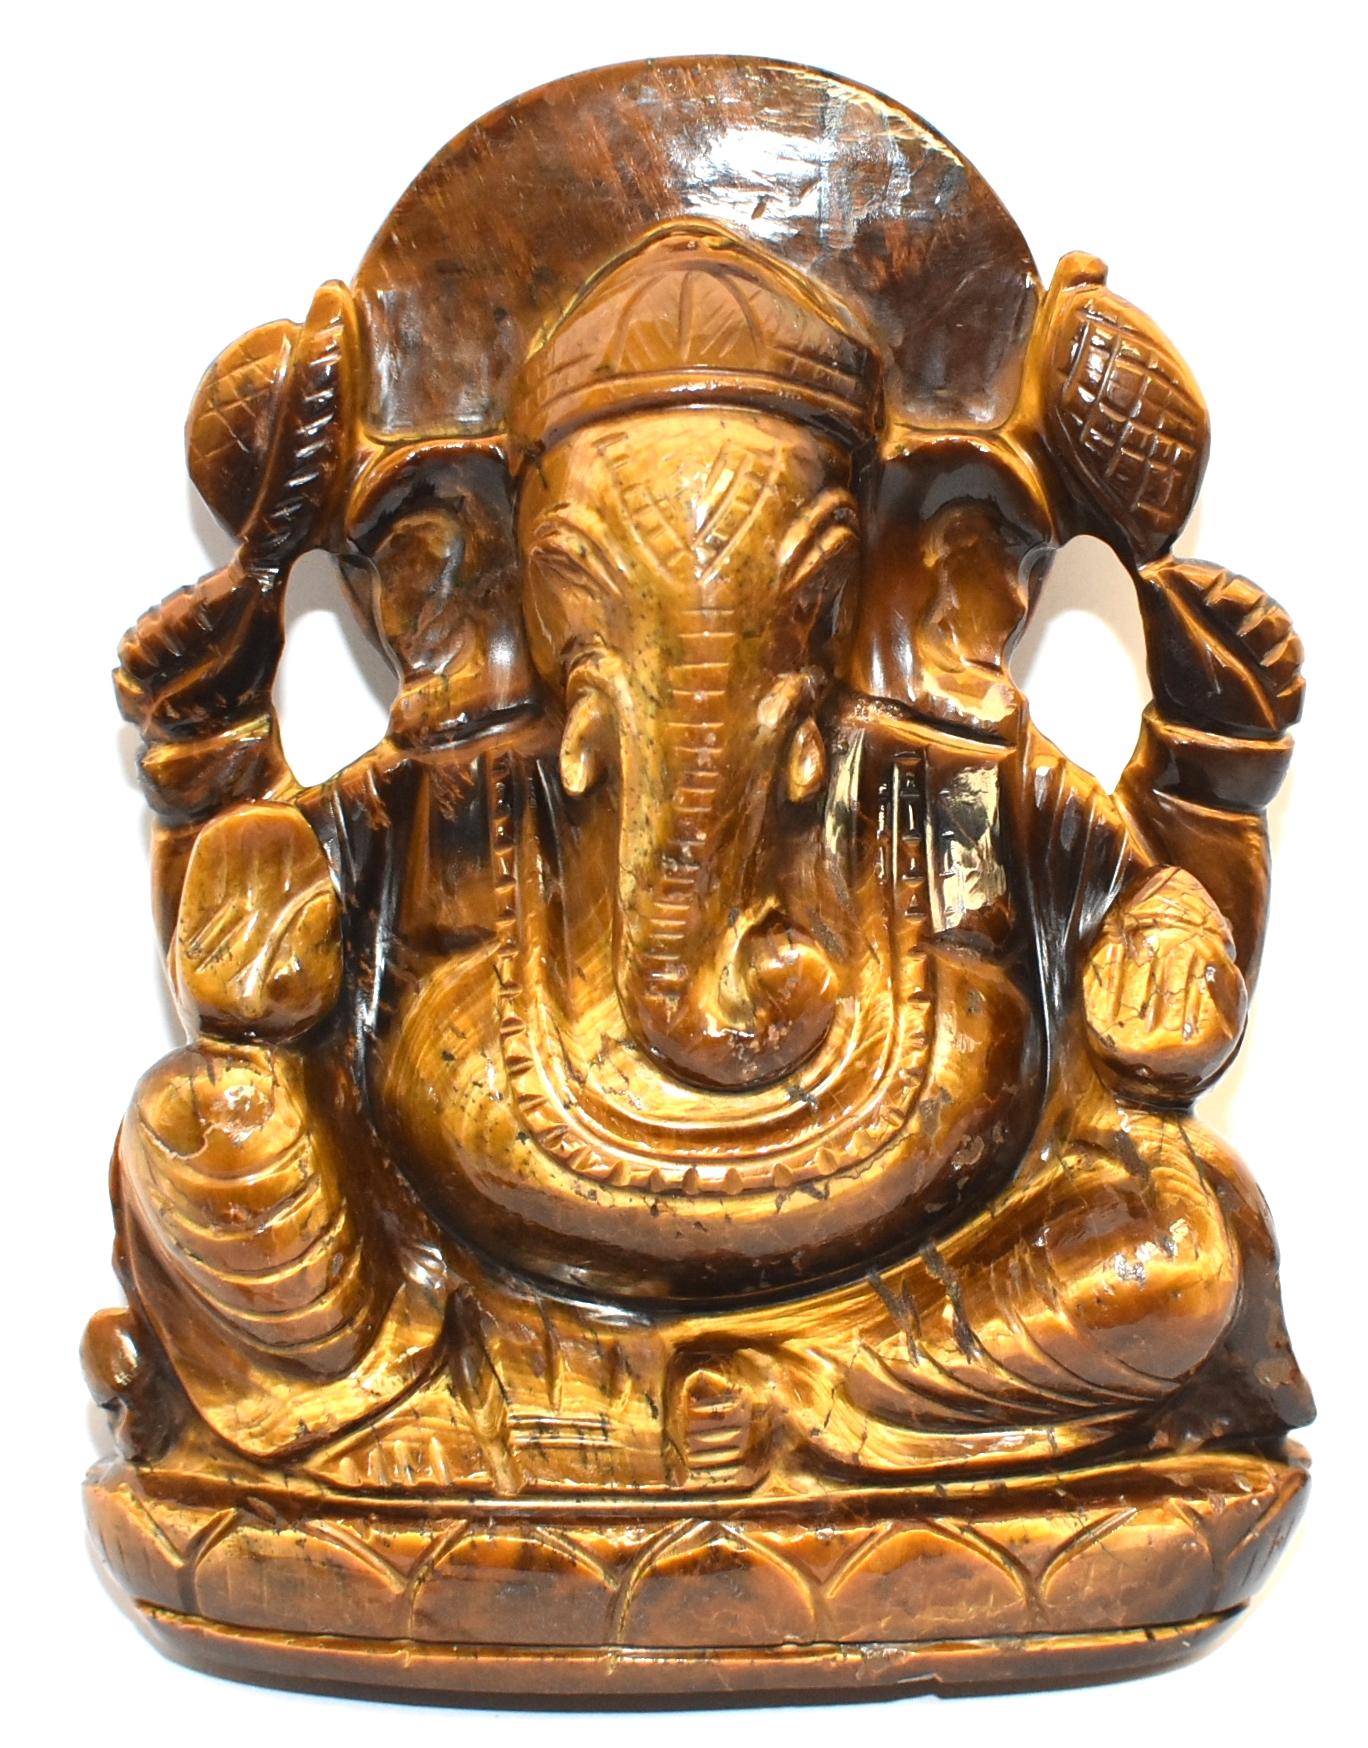 A beautiful hand carved natural tiger's eye sculpture depicting the God Ganesh. Seated on a lotus throne, the 4-armed Ganesh is holding his various attributes. This statue is carved out of one piece of fine grade tiger's eye demonstrating fantastic